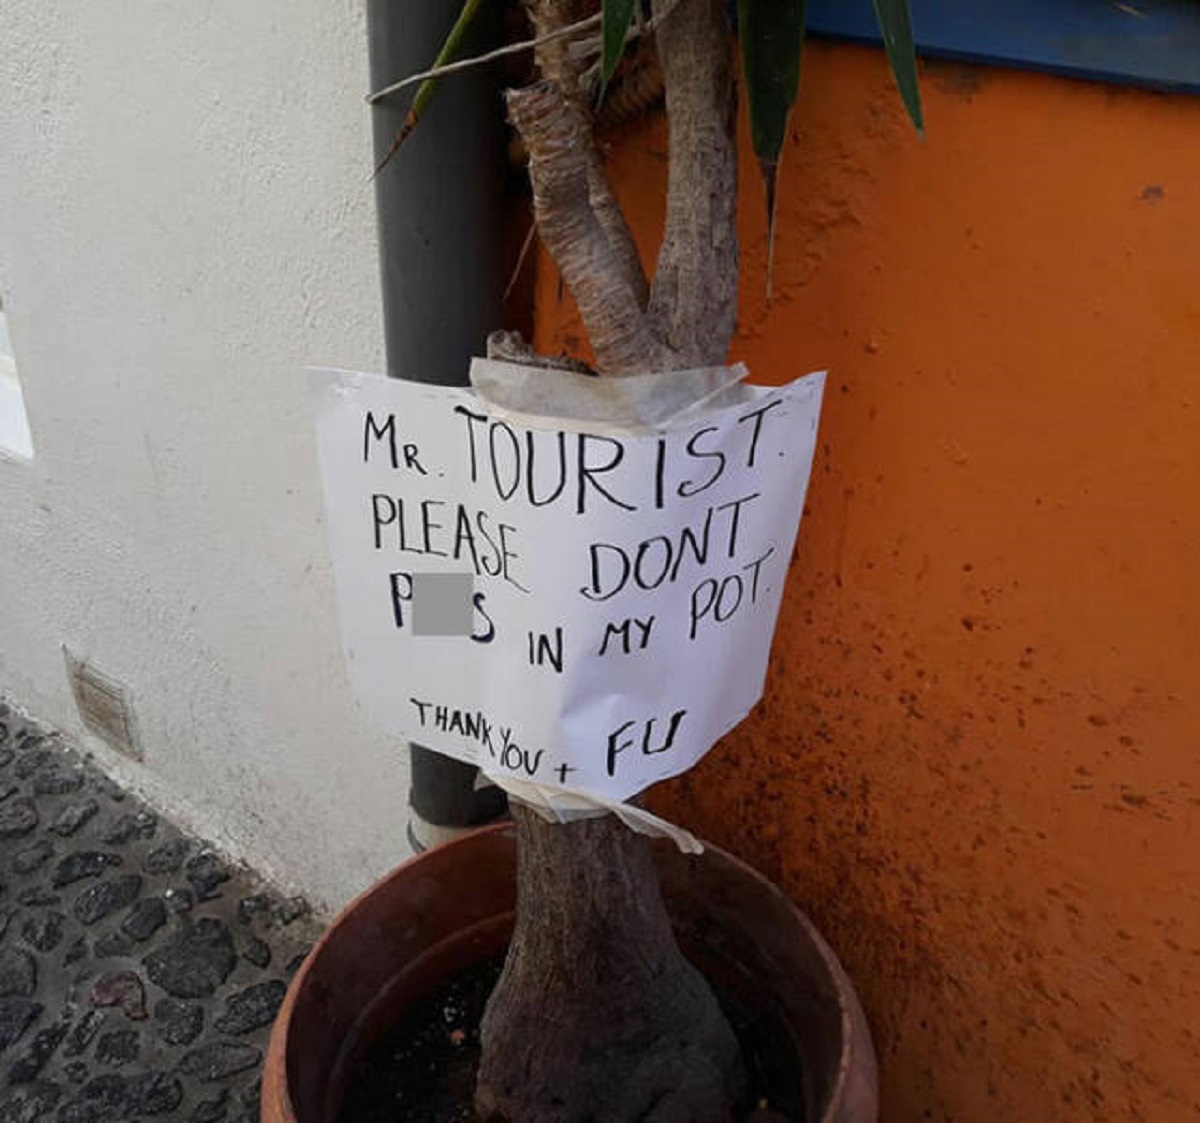 tree - Mr. Tourist Please Ps Dont In My Pot Thank You Fu